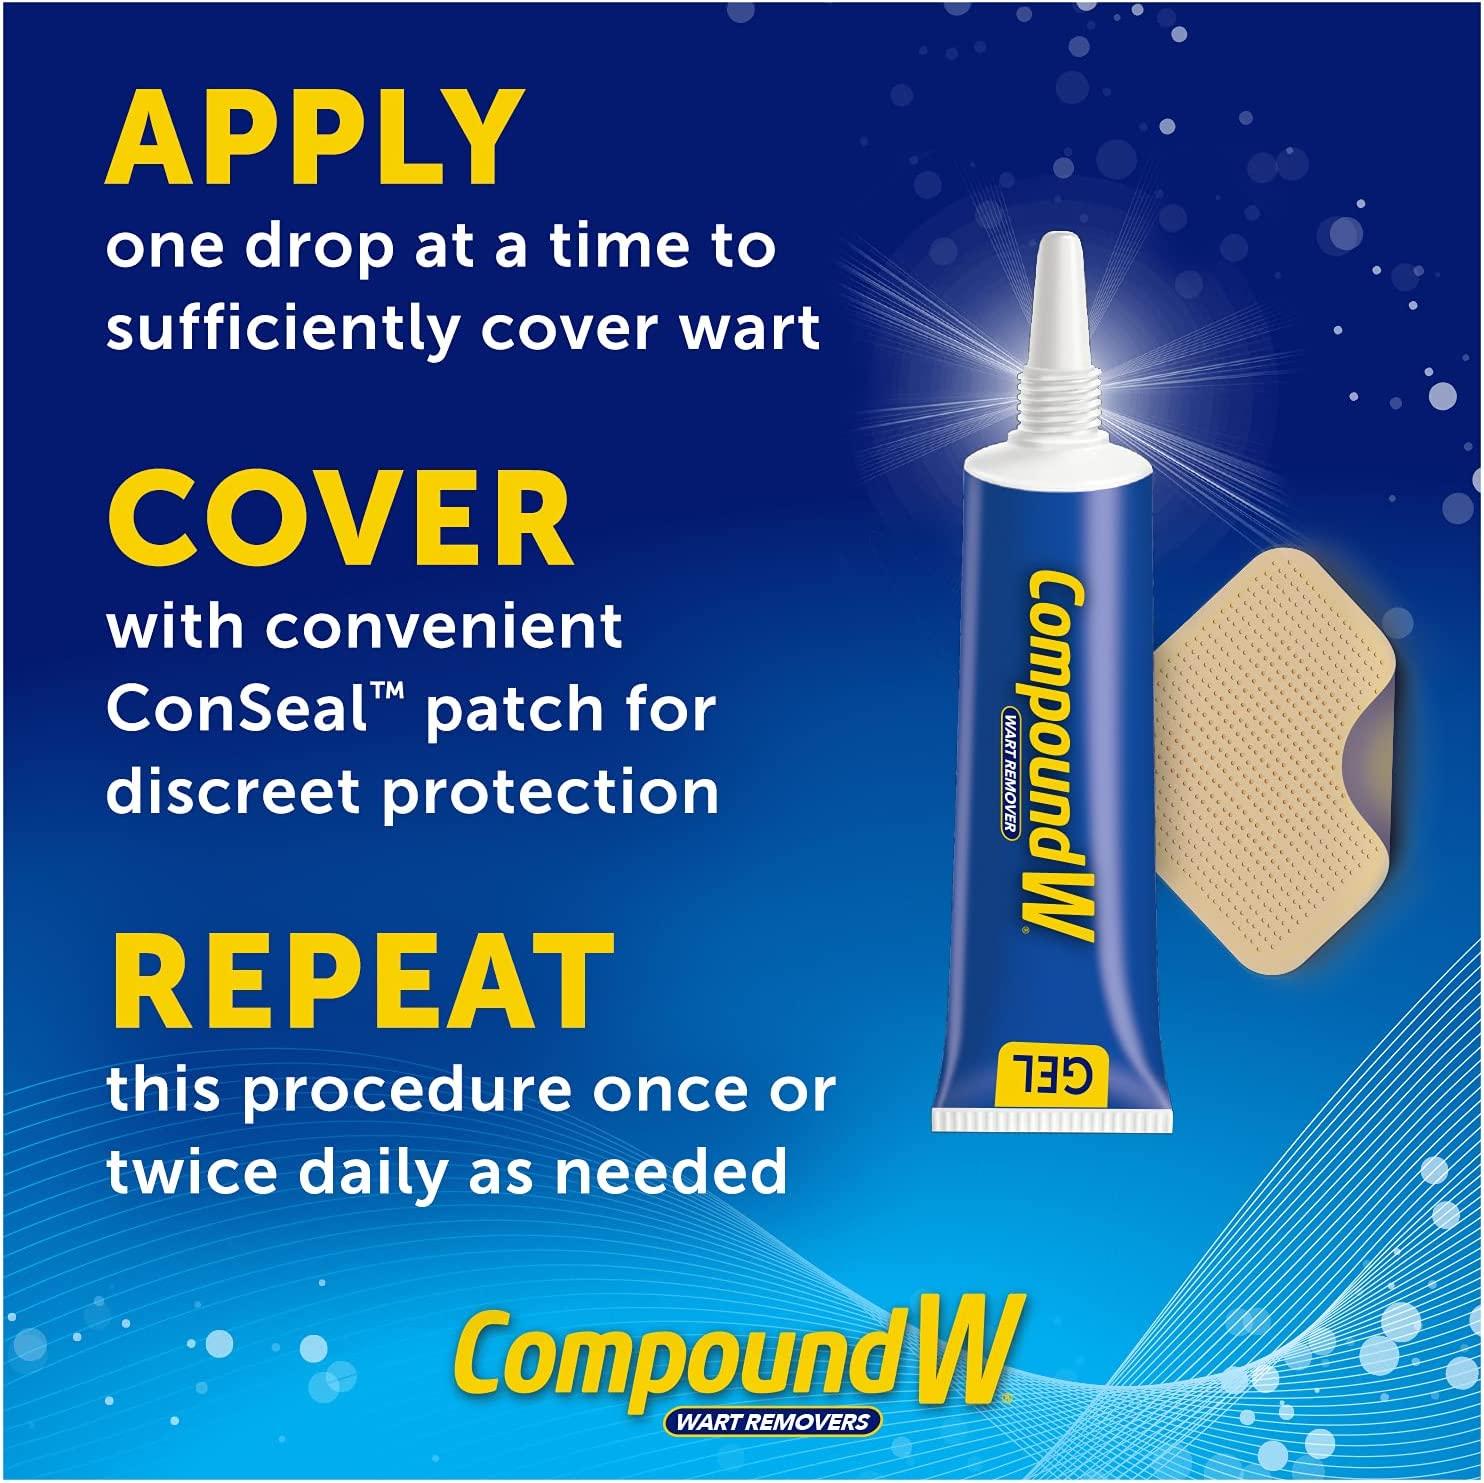 Compound W Maximum Strength Fast Acting Gel Wart Remover, 0.25 oz 